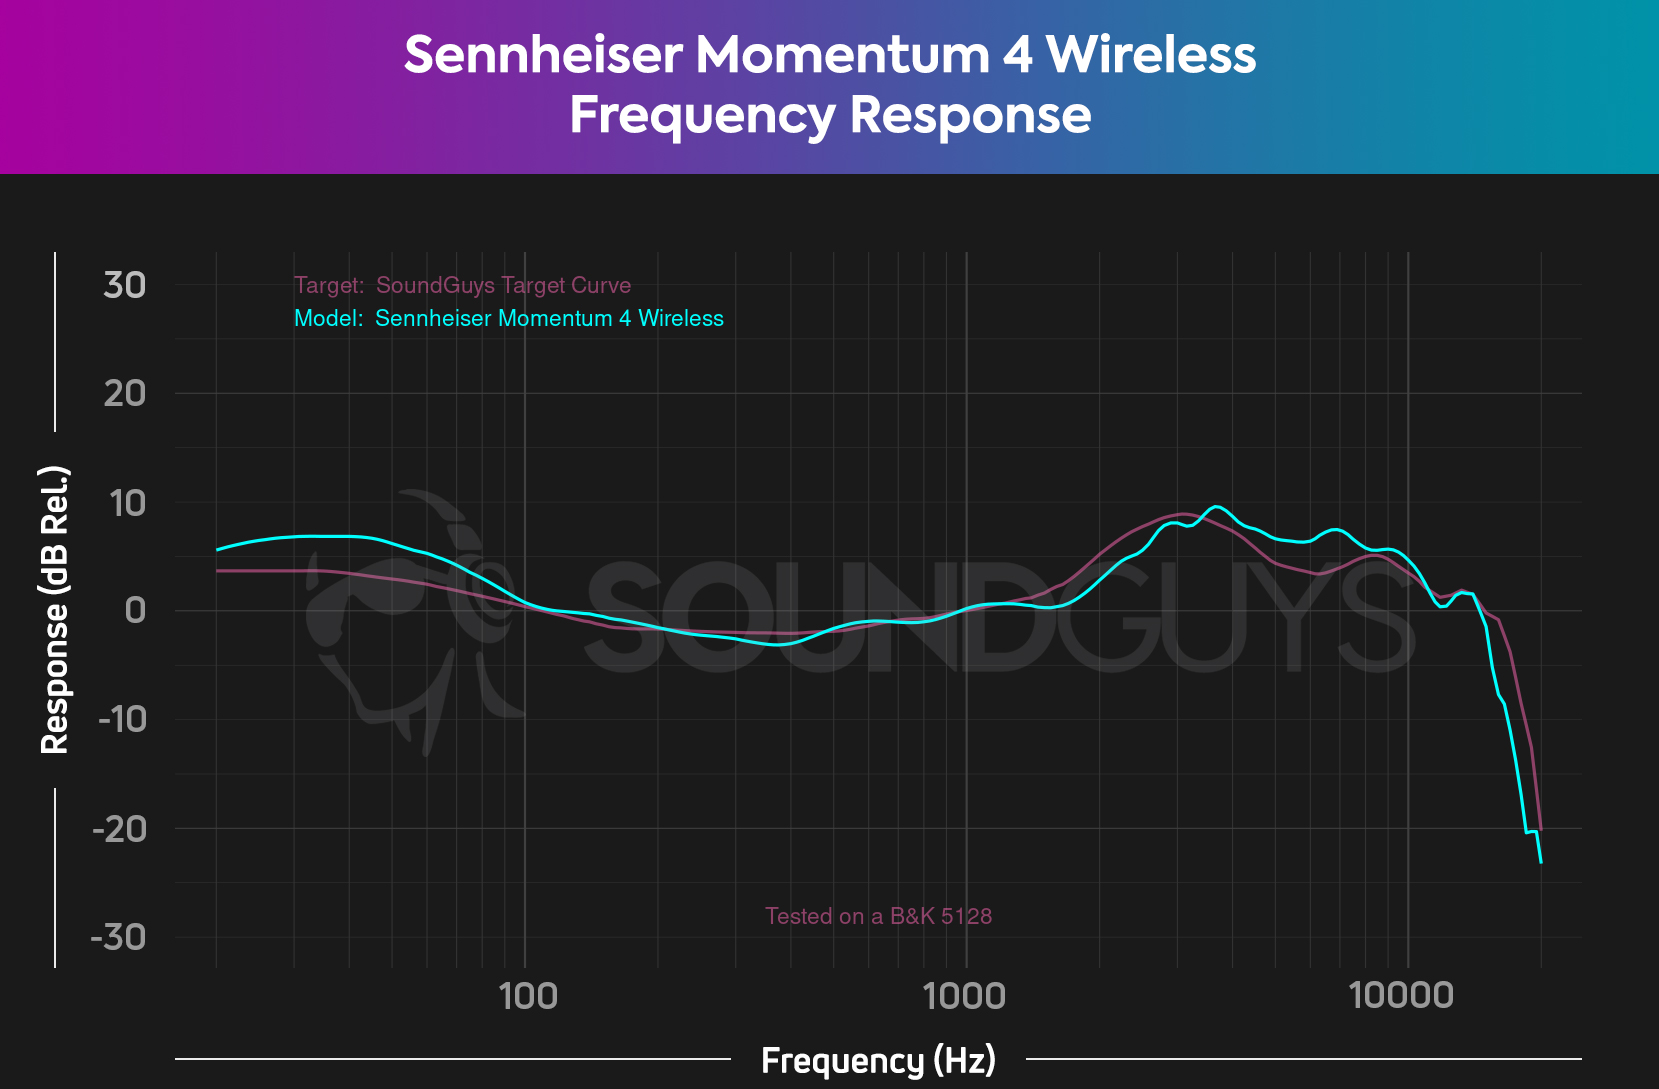 A chart depicts the Sennheiser Momentum 4 Wireless frequency response, which closely follows the SoundGuys Target Curve.